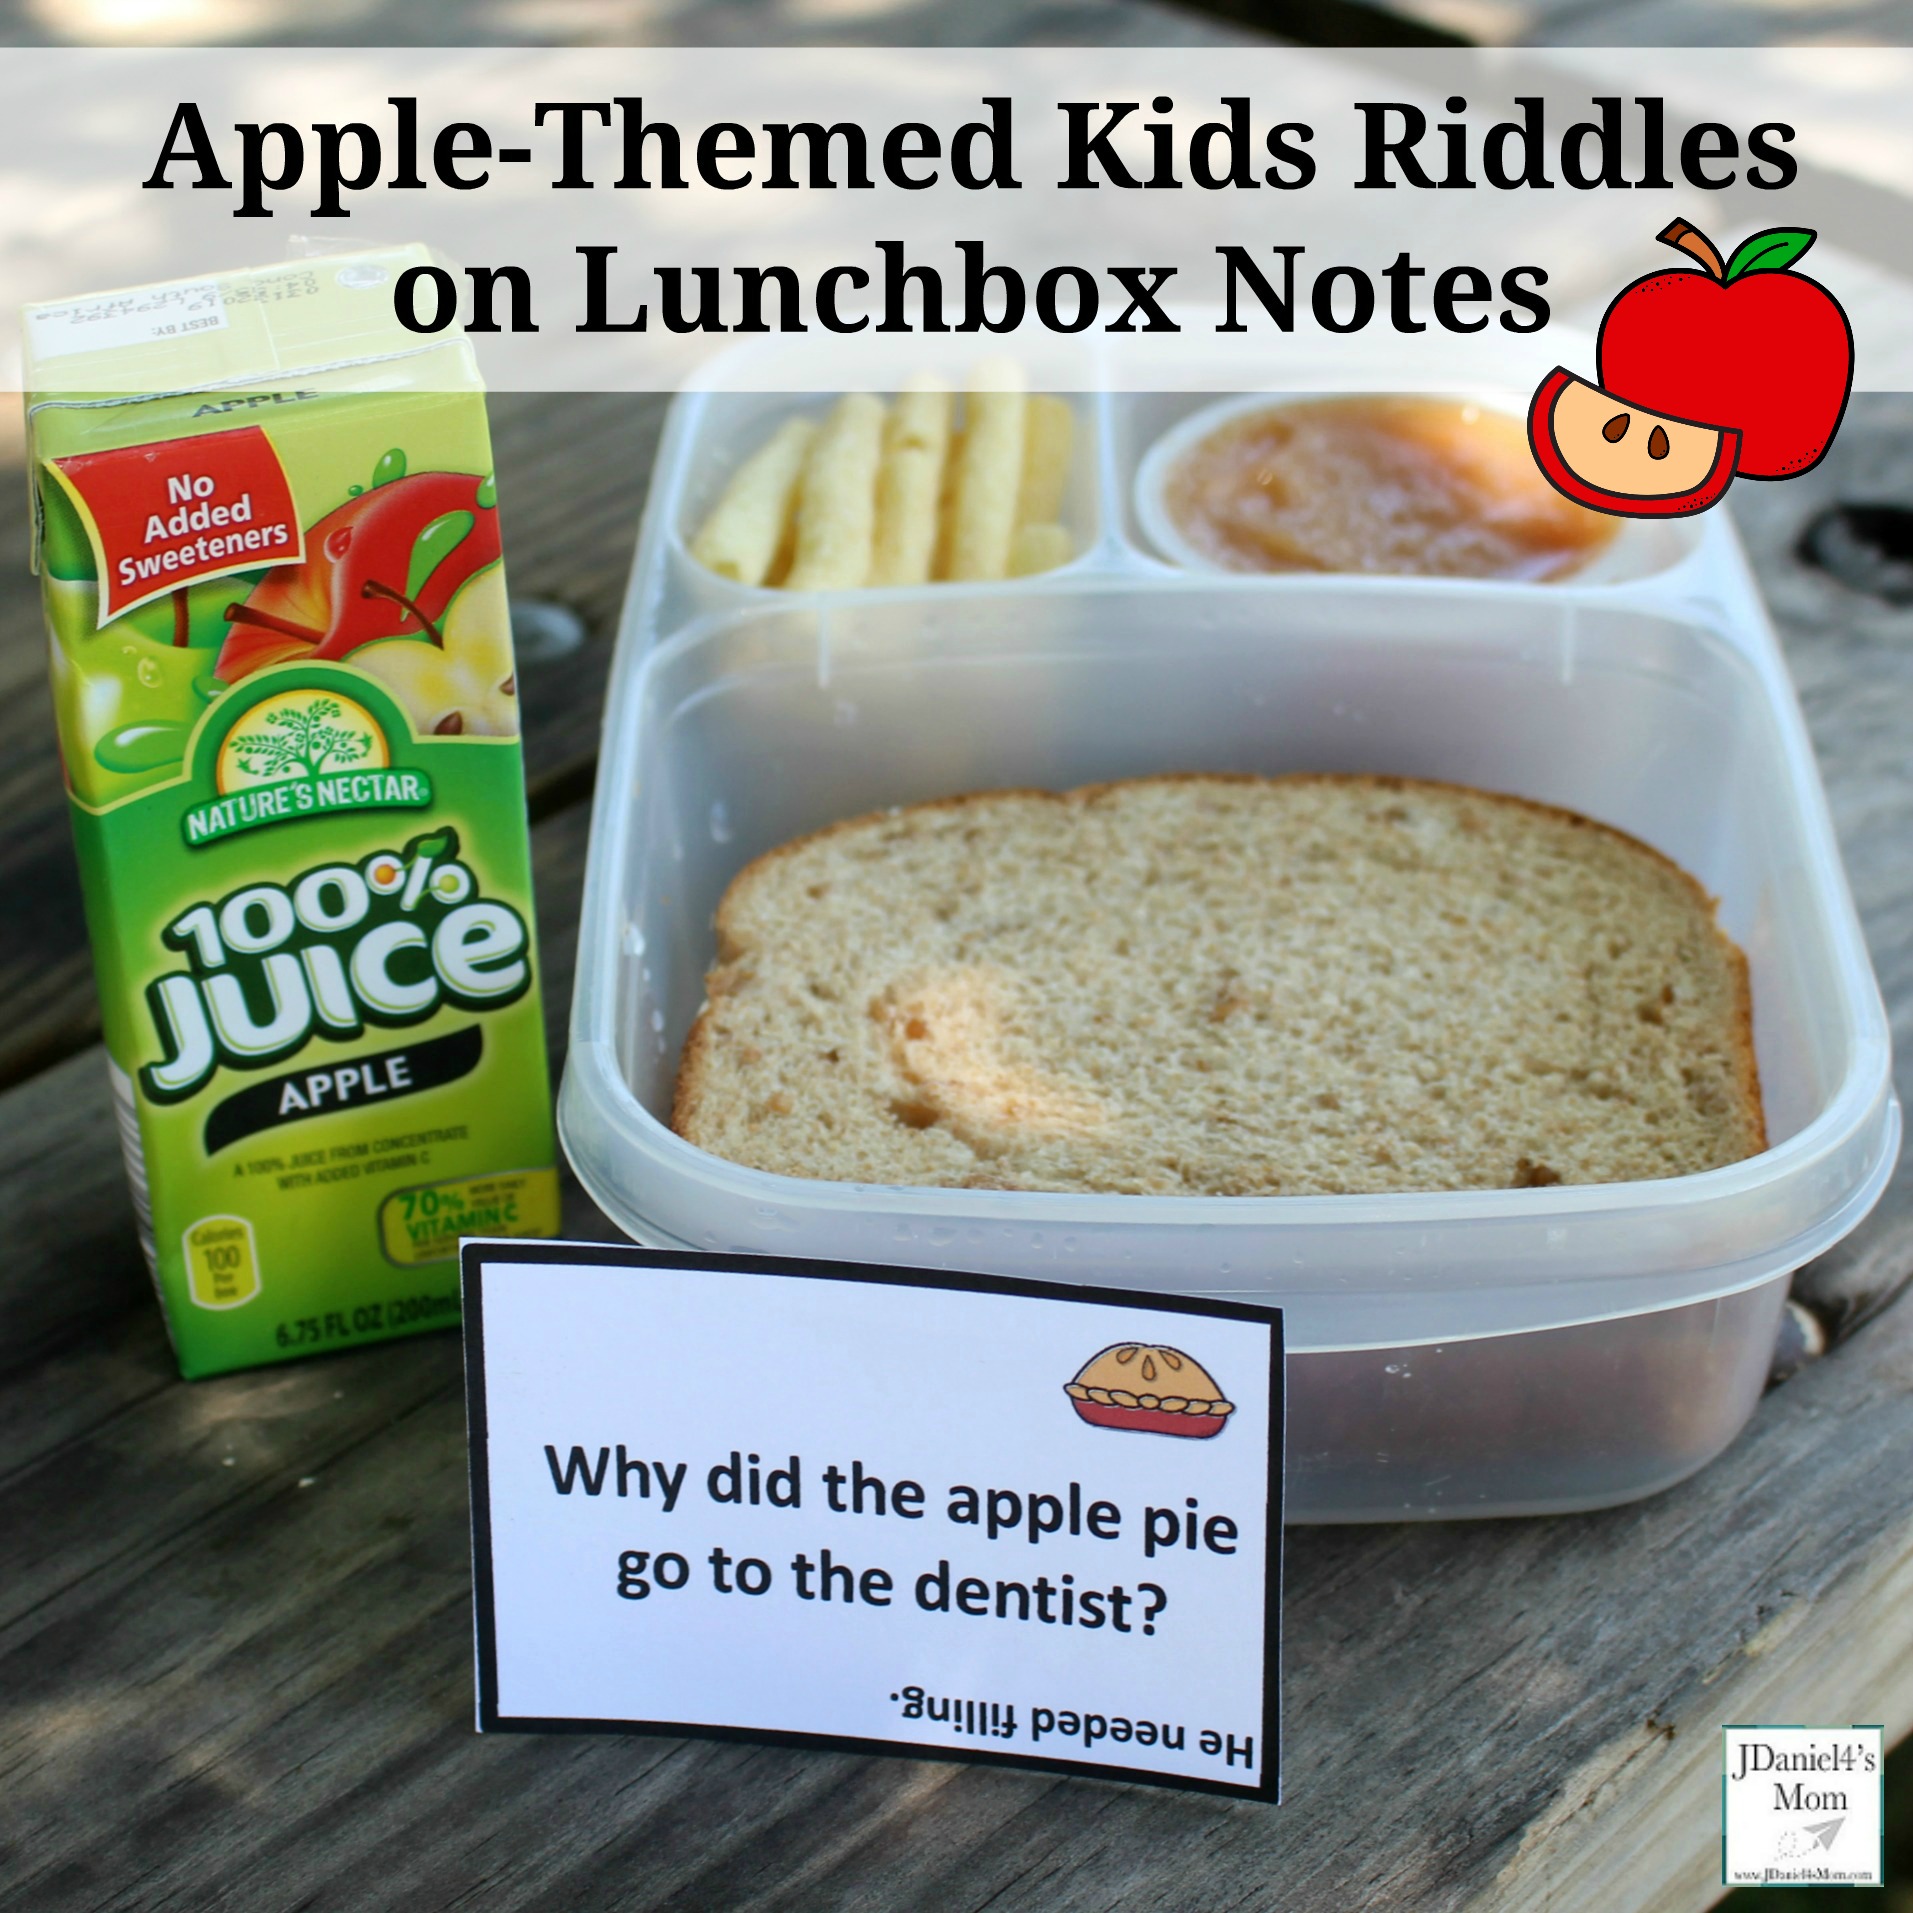 Free Printable Set of Apple-Themed Kid Riddles on Lunchbox Notes